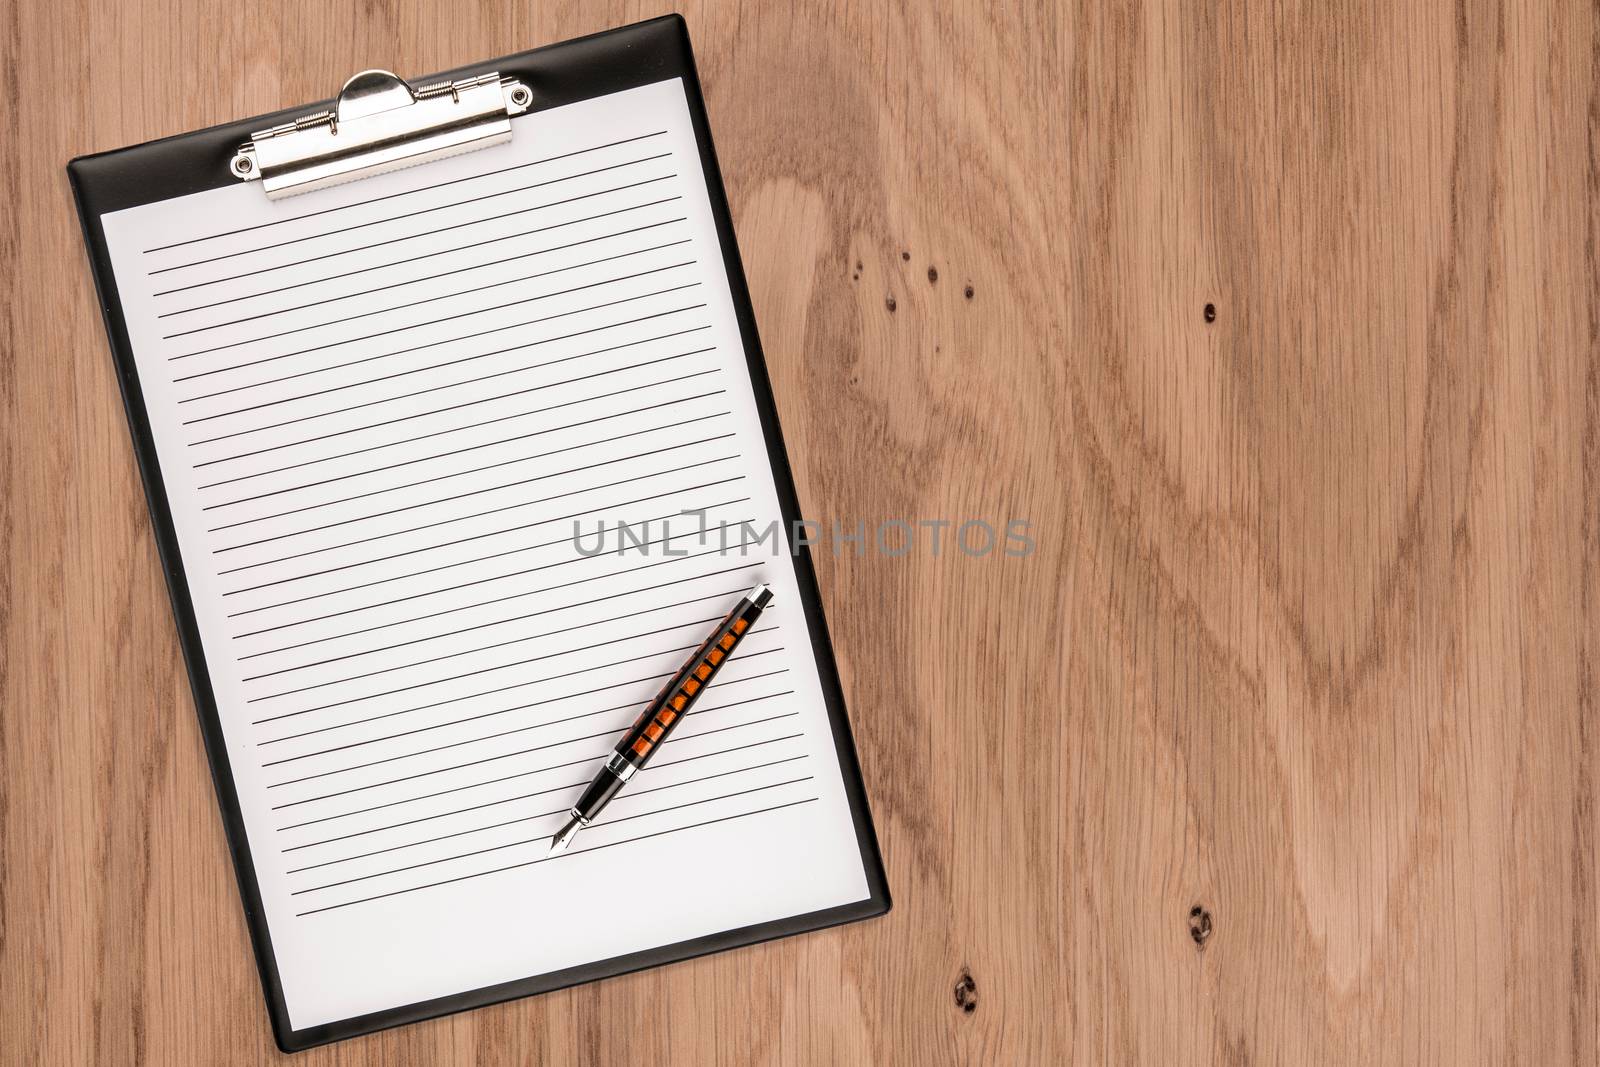 Clipboard with blank paper and pen on wooden desk. Copy space for text